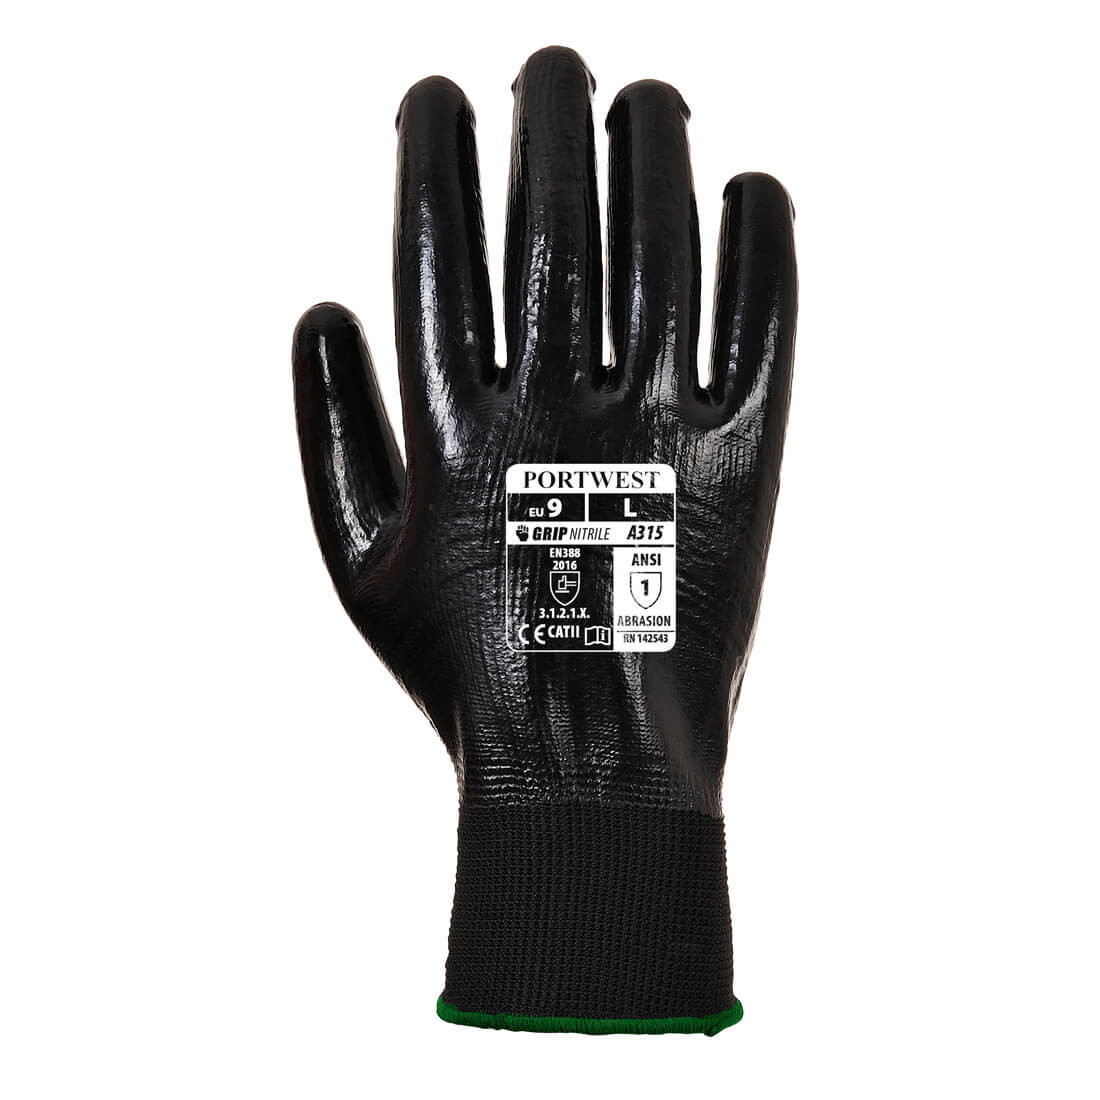 All Flex Grip Glove - Personal protection